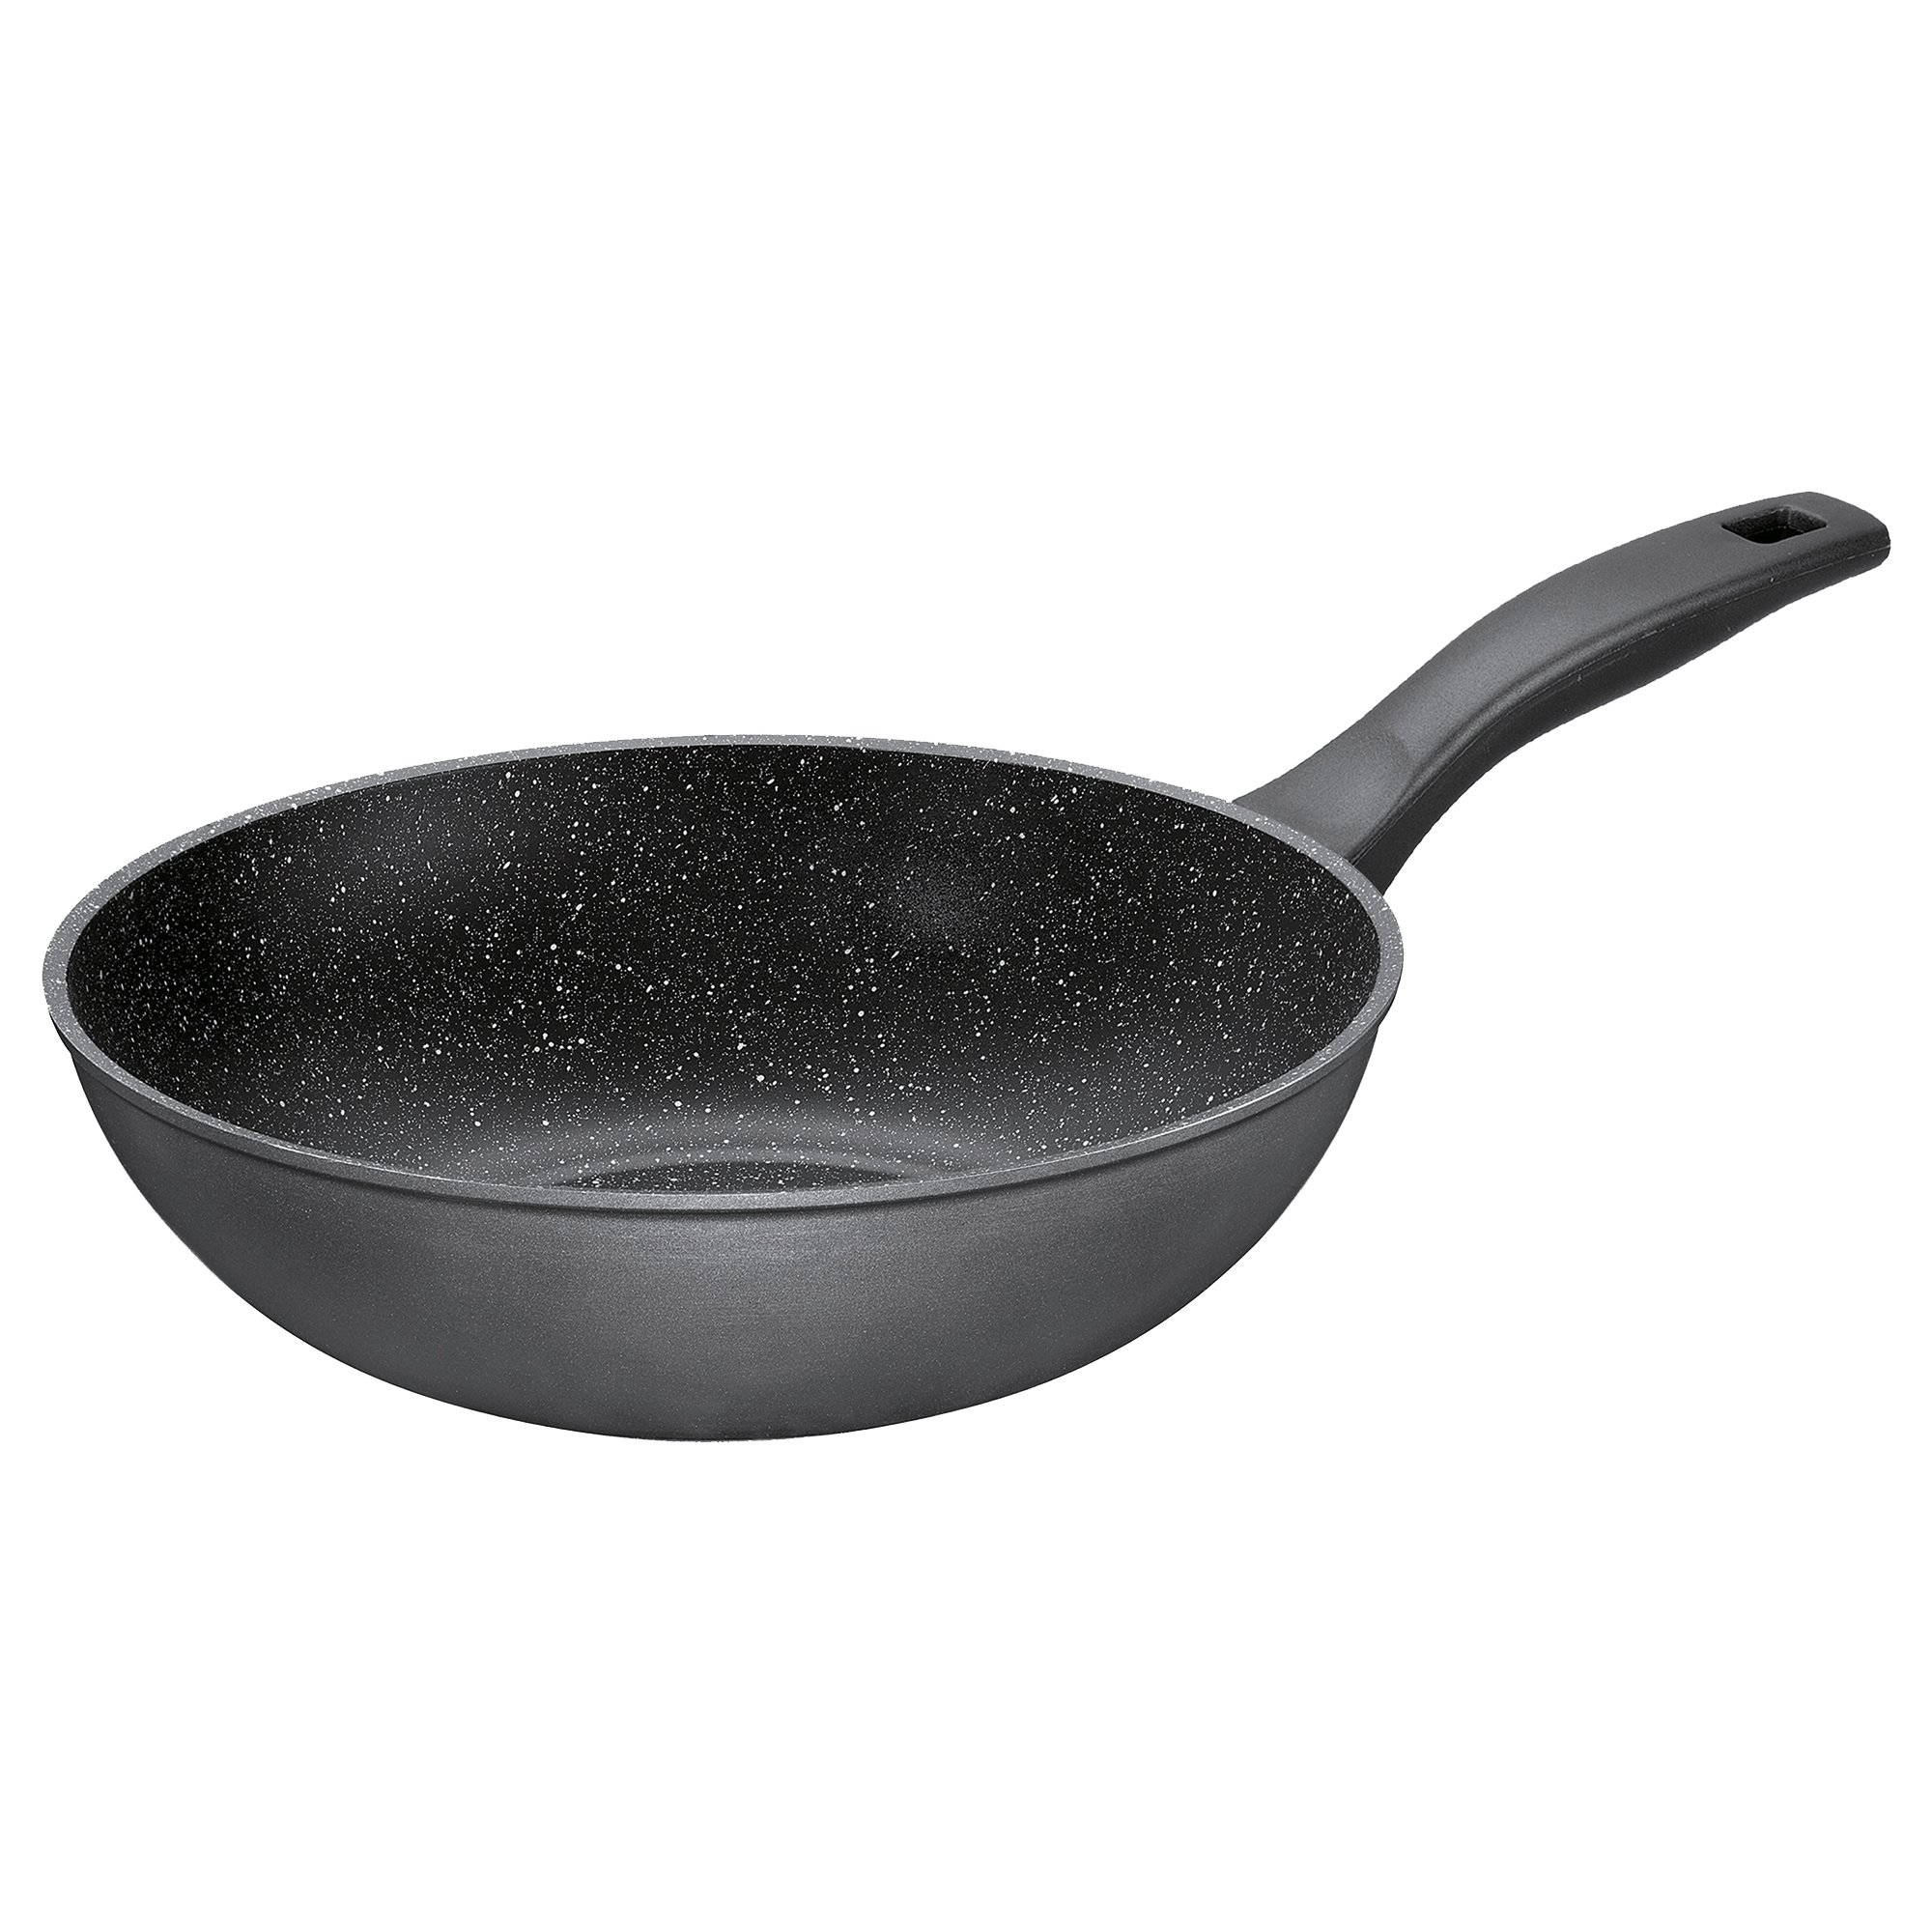 STONELINE® Wok Pan 30 cm, Non-Stick Pan | Made in Germany | CLASSIC